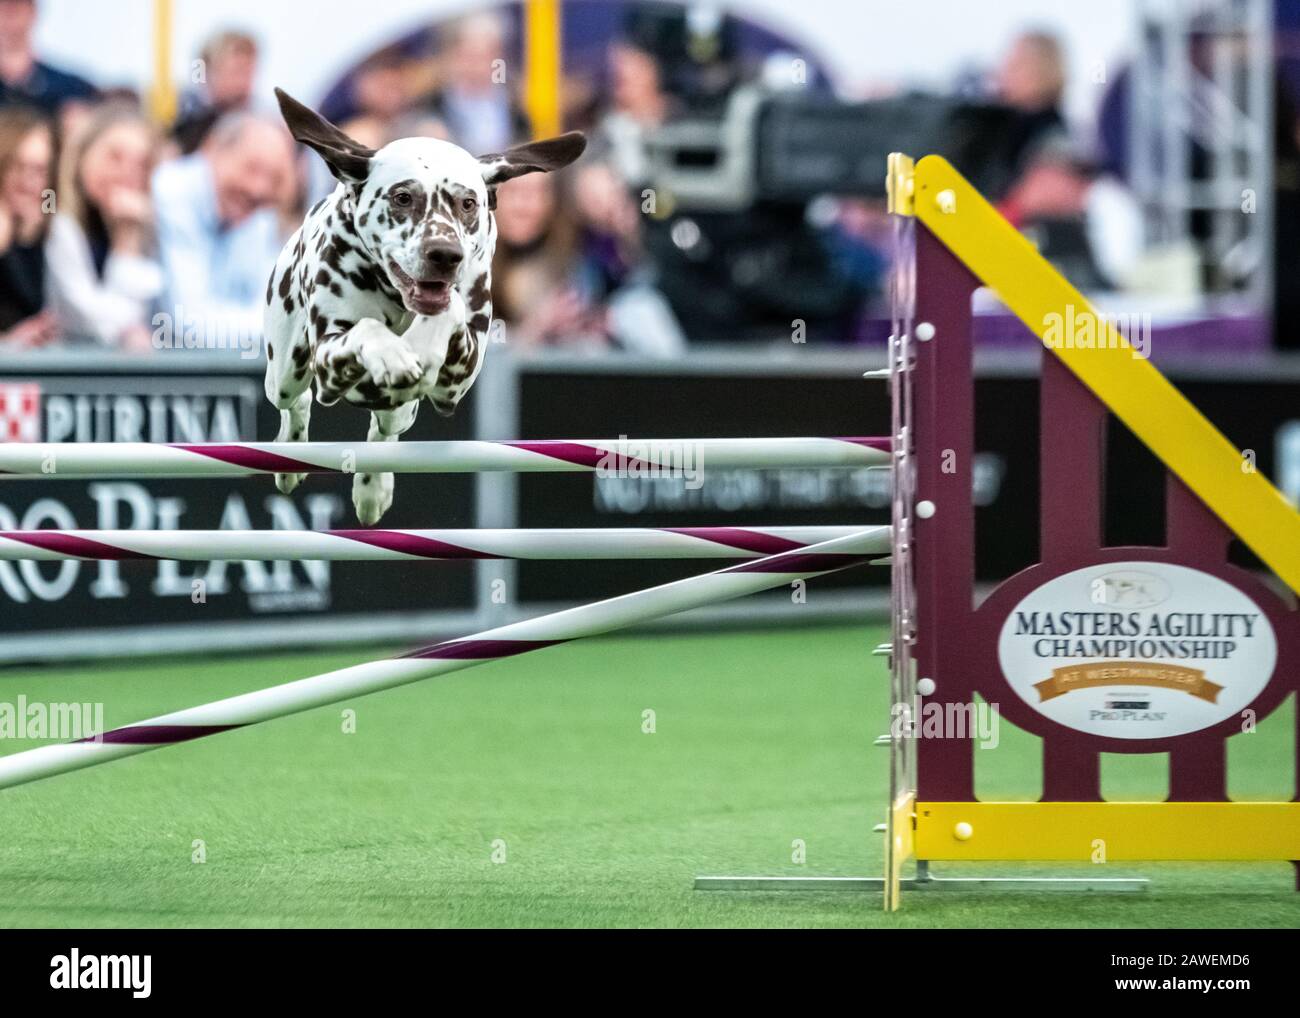 New York, USA. 8th Feb, 2020. Phil, a Dalmatian, clears an obstacle during the qualifying round of The Westminster Kennel Club Dog show Masters Agility Championship in New York city. Credit: Enrique Shore/Alamy Live News Stock Photo